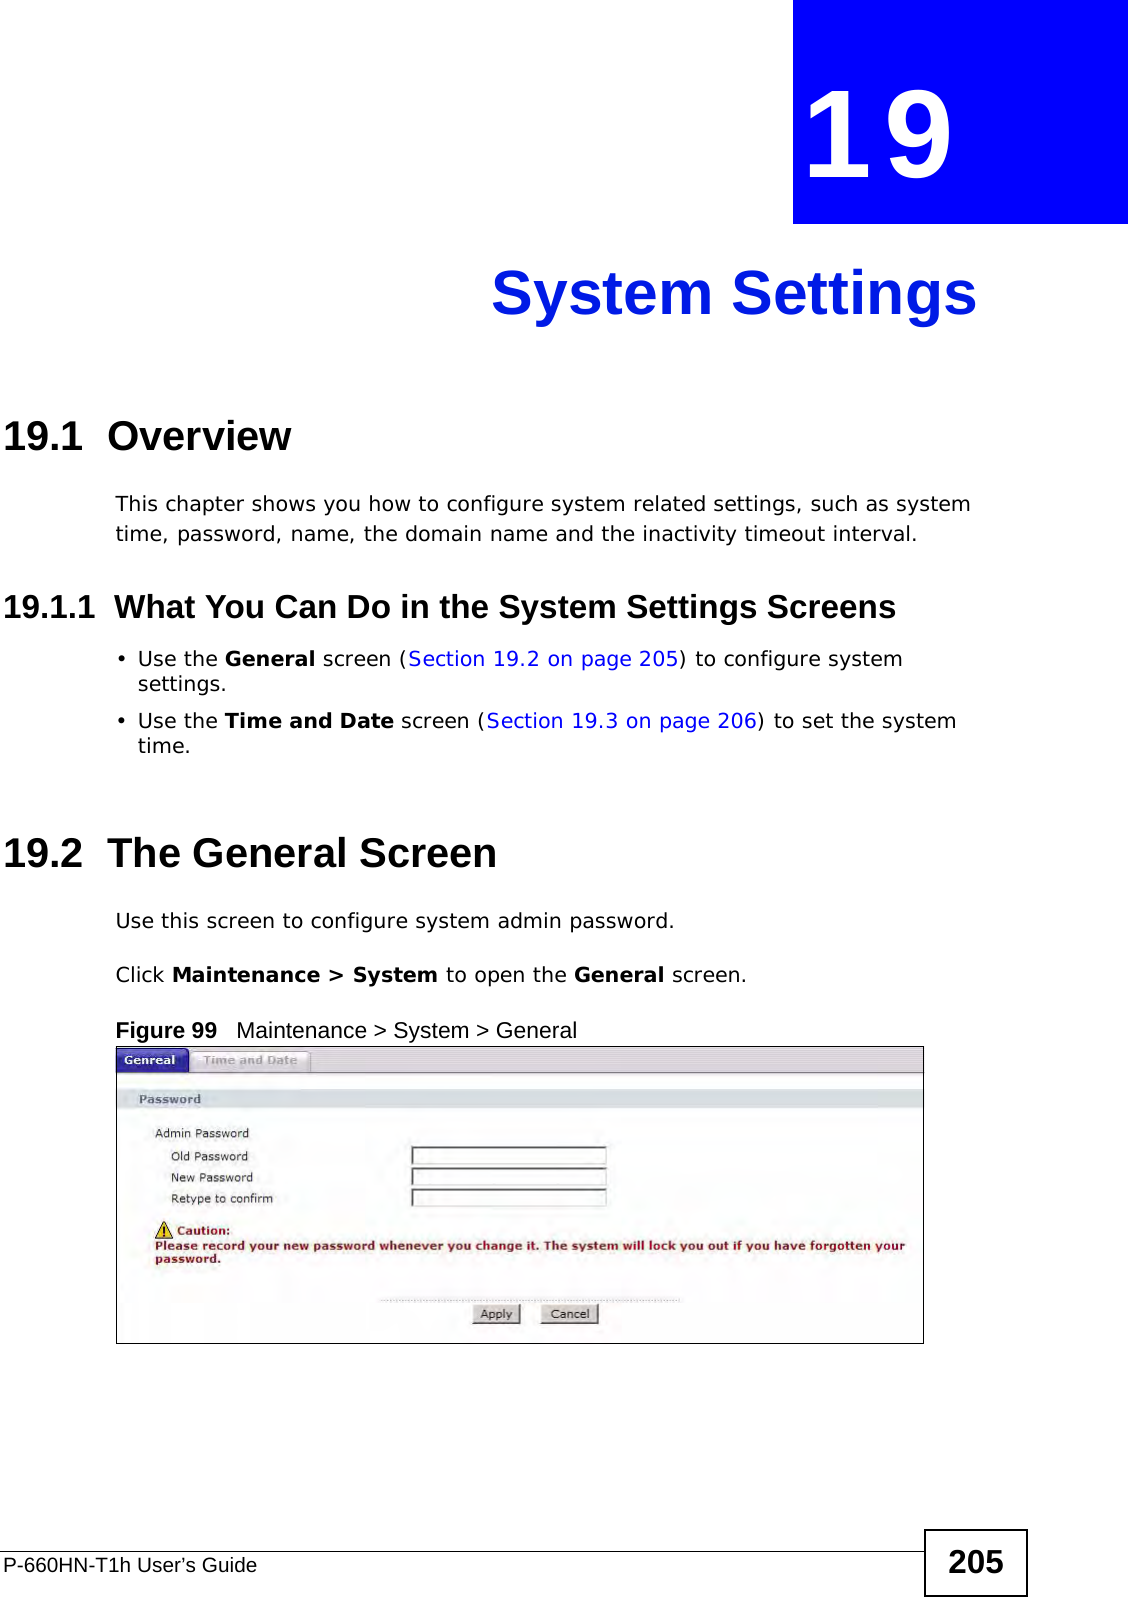 P-660HN-T1h User’s Guide 205CHAPTER  19 System Settings19.1  OverviewThis chapter shows you how to configure system related settings, such as system time, password, name, the domain name and the inactivity timeout interval.    19.1.1  What You Can Do in the System Settings Screens•Use the General screen (Section 19.2 on page 205) to configure system settings.•Use the Time and Date screen (Section 19.3 on page 206) to set the system time.19.2  The General ScreenUse this screen to configure system admin password.Click Maintenance &gt; System to open the General screen. Figure 99   Maintenance &gt; System &gt; General